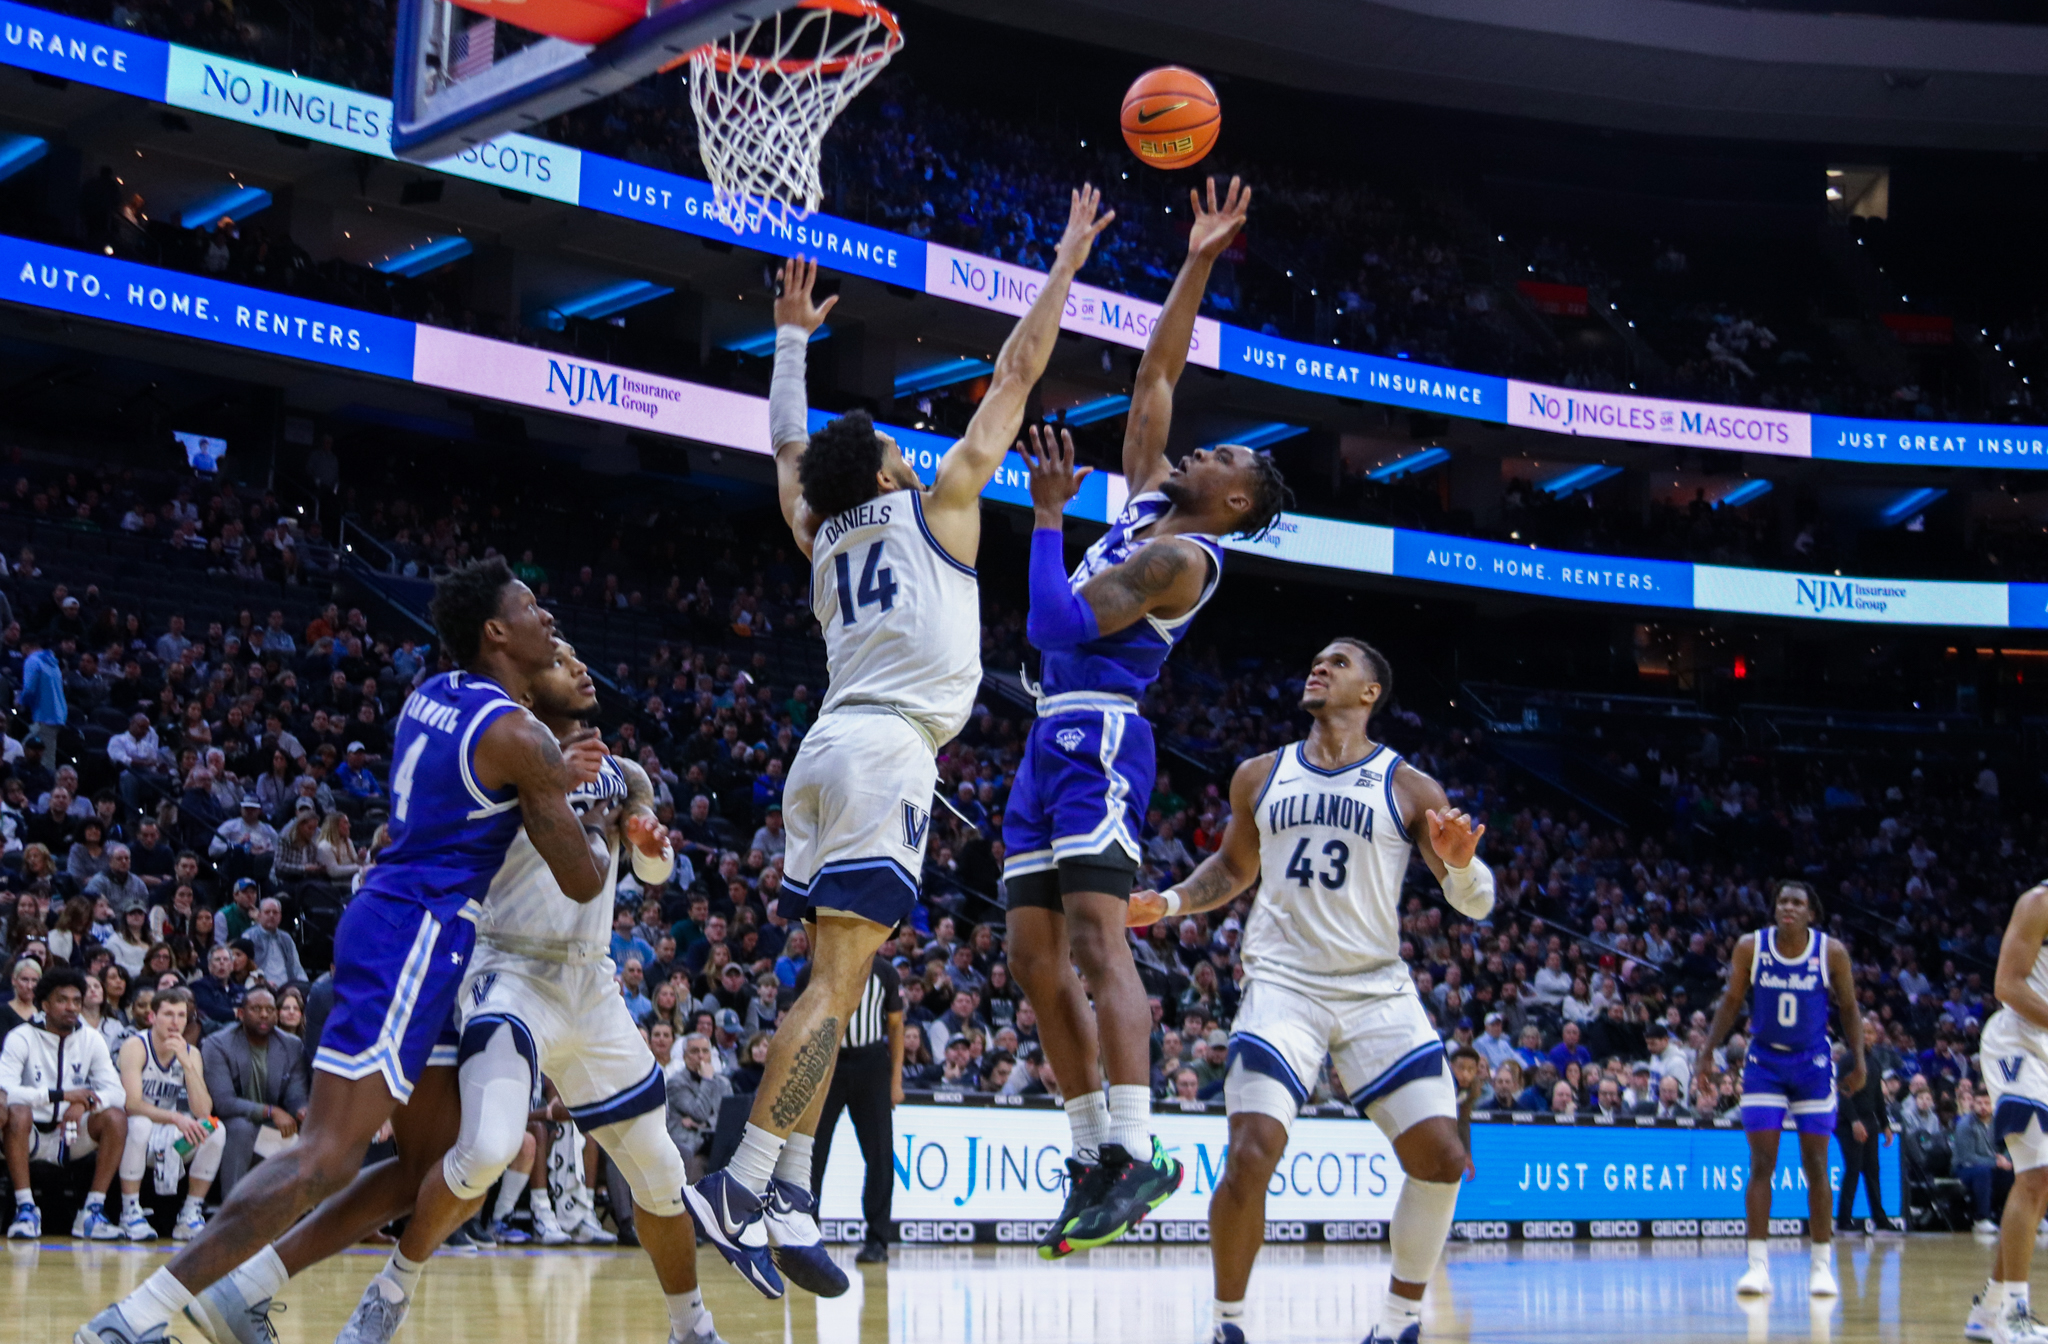 KC Ndefo with the floater over the Villanova defense.